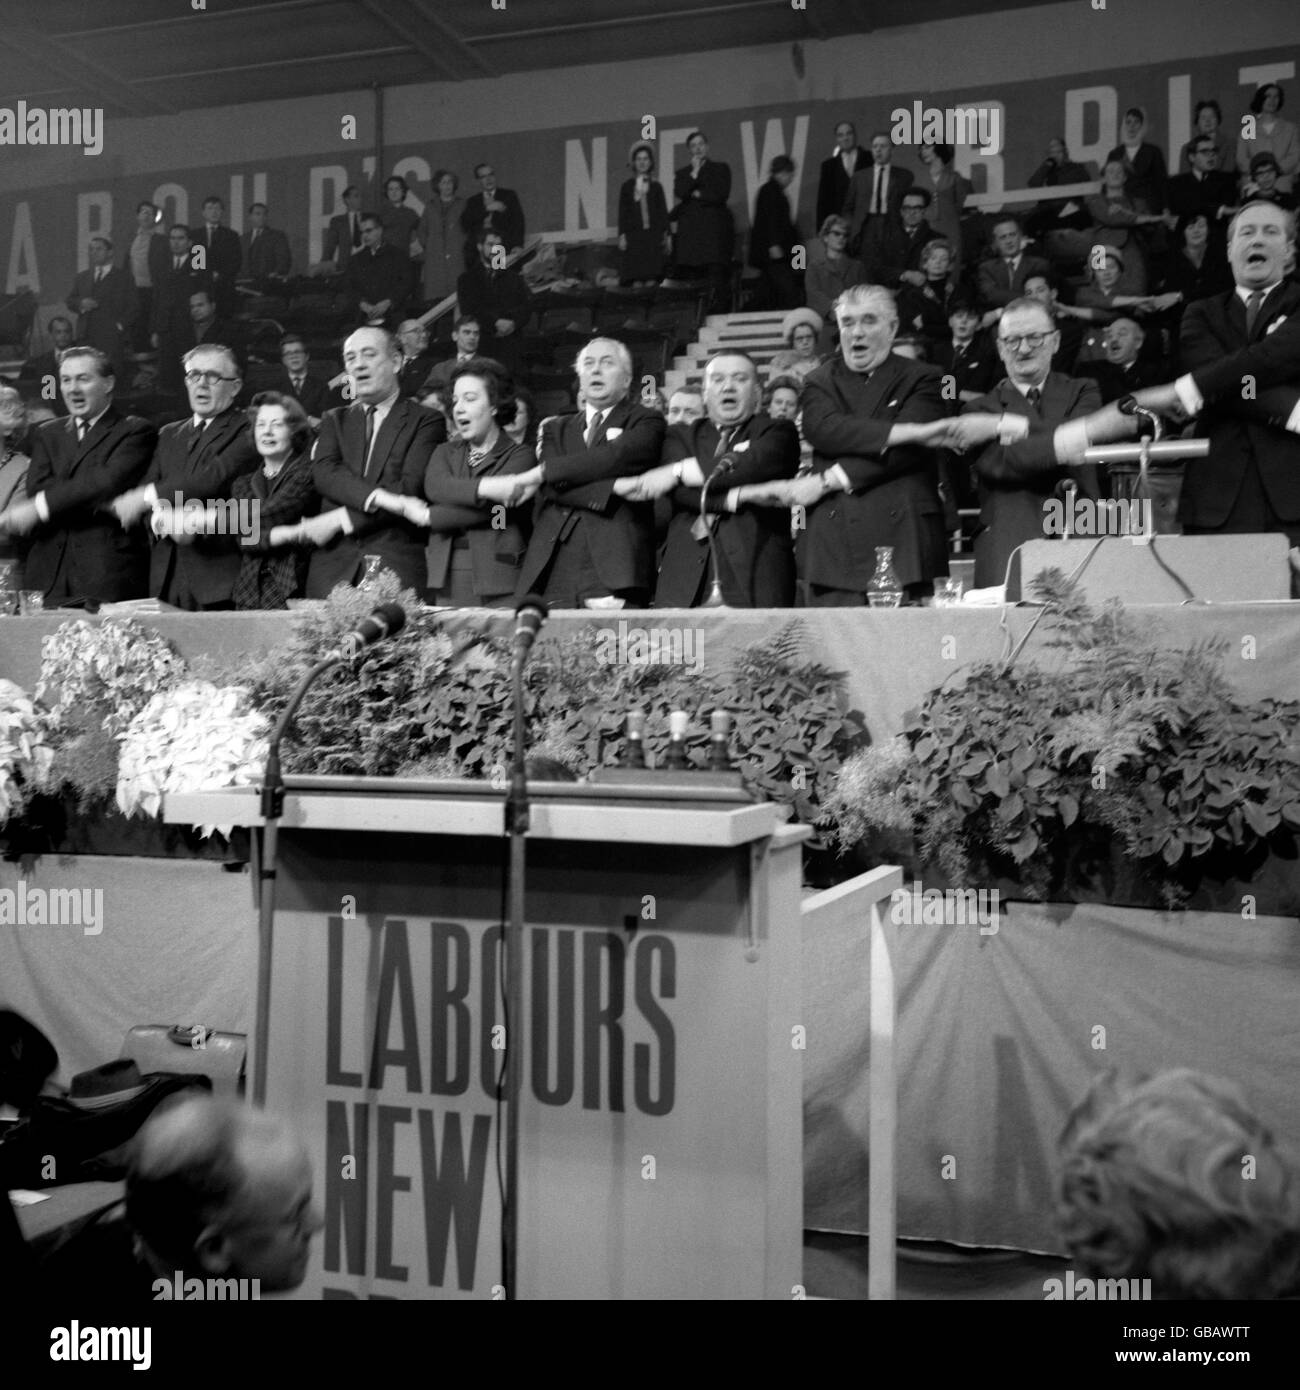 Harold Wilson, the Prime Minister, and other leading Party members join hands to sing Auld Lang Syne at the end of the Labour Party victory conference. Left to right: James Callaghan, Richard Crossman, Barbara Castle, Tom Driberg, Alice Bacon, Harold Wilson, Ray Gunter, Len Williams, unidentified, and Anthony Greenwood. Stock Photo